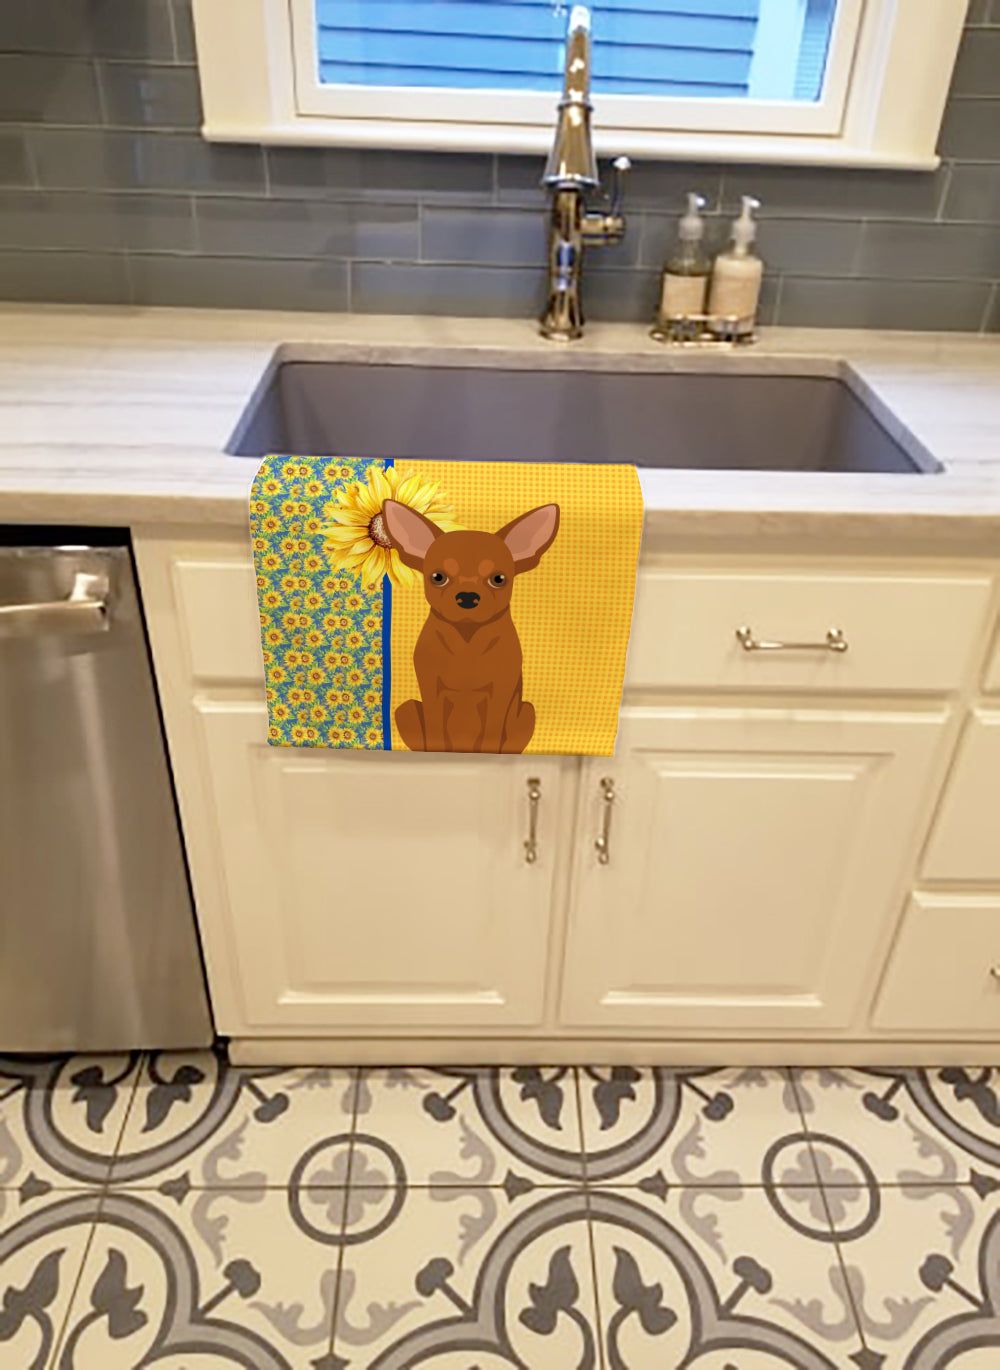 Buy this Summer Sunflowers Red Chihuahua Kitchen Towel